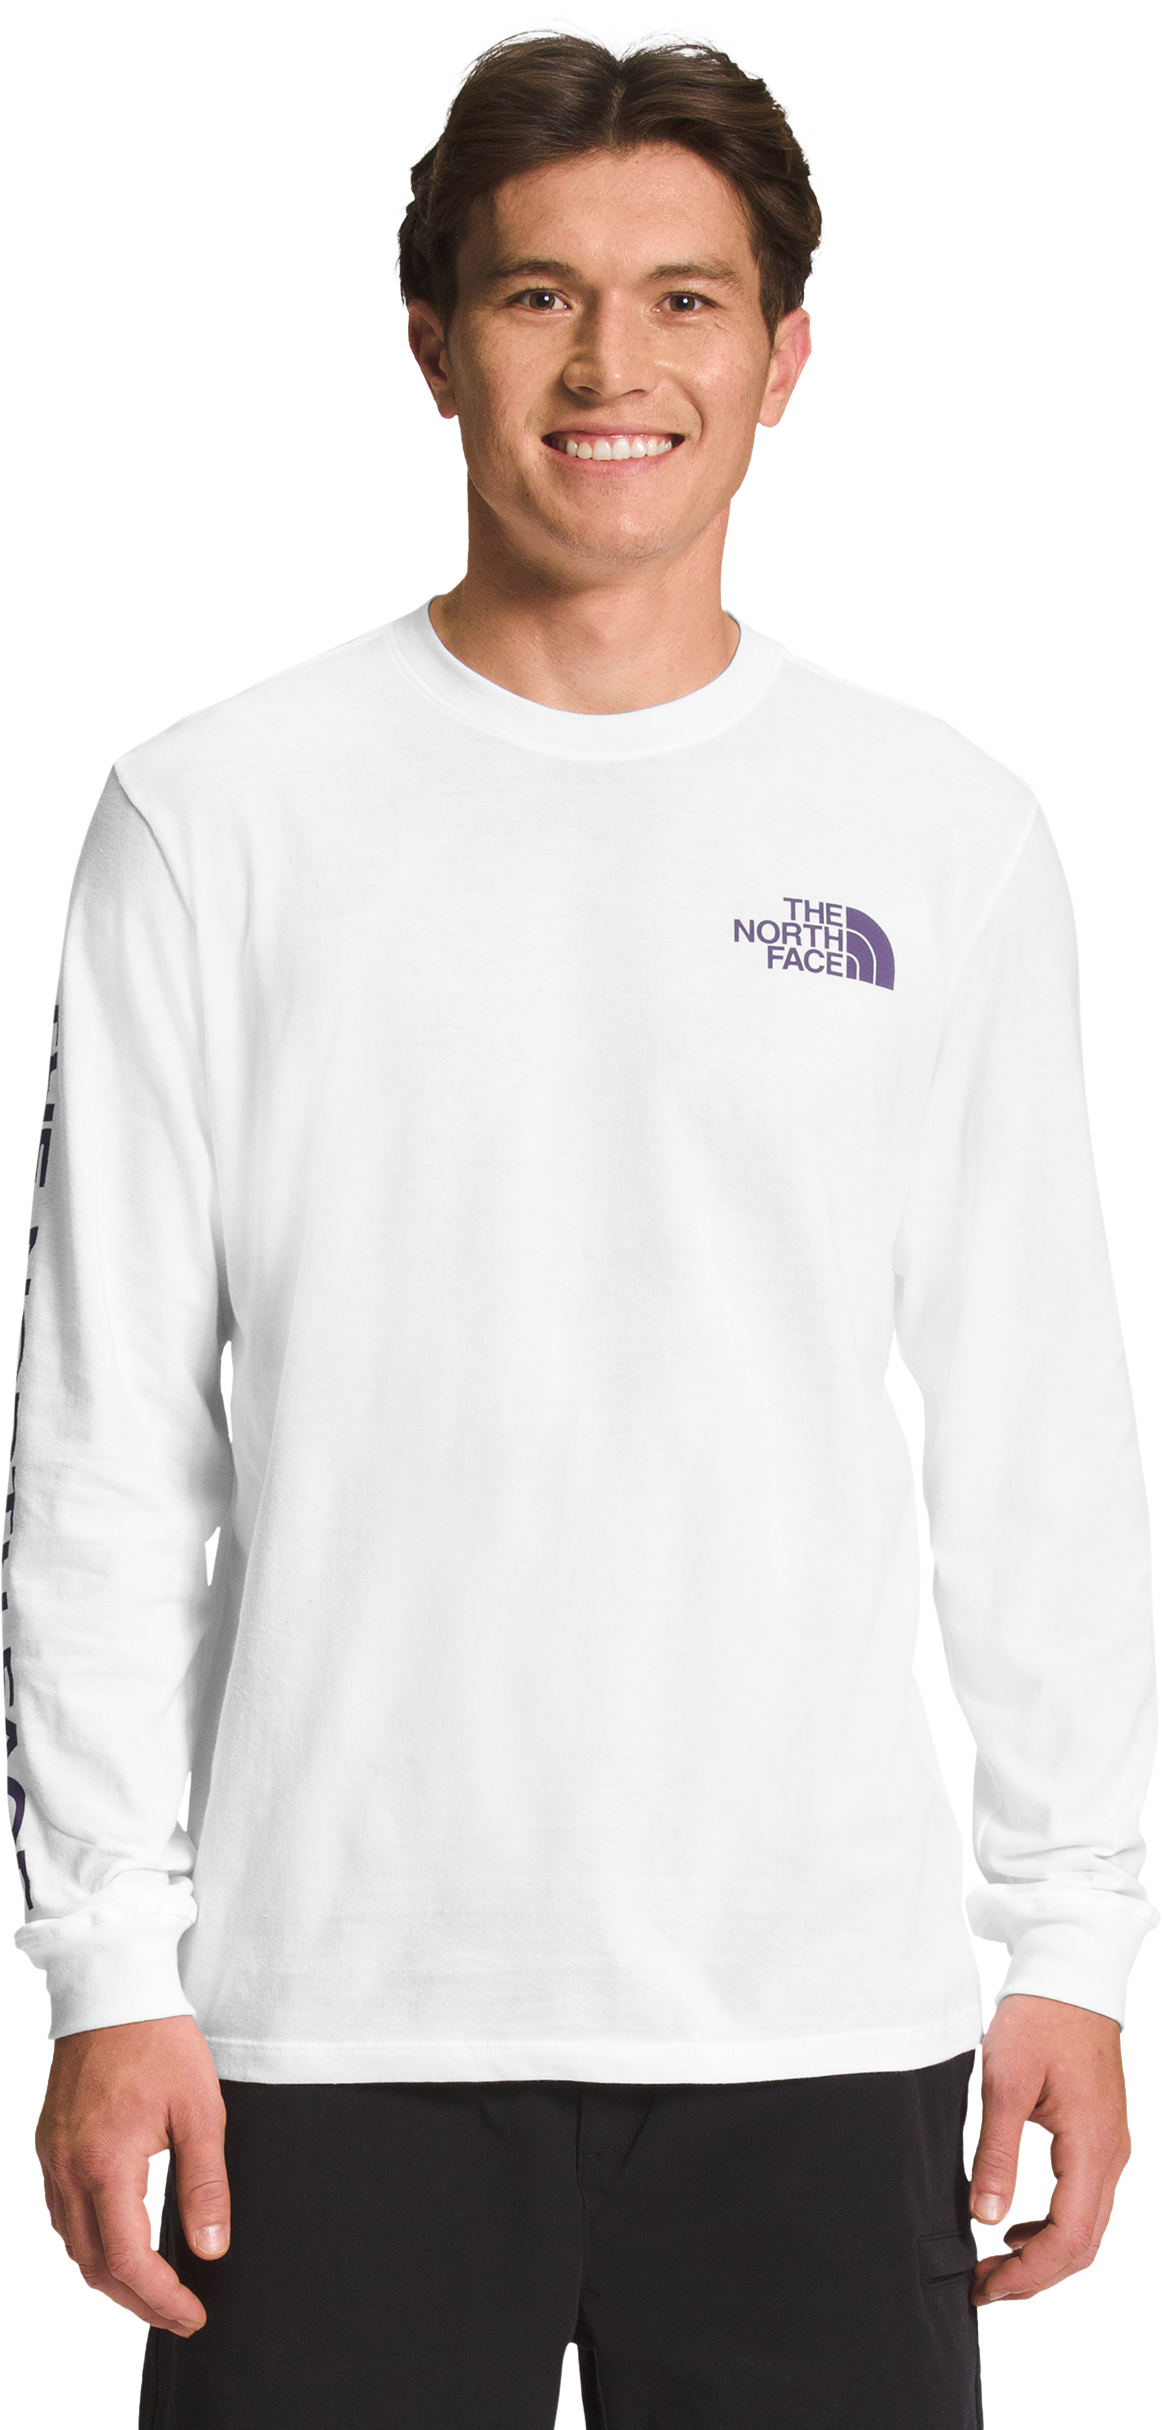 The North Face Hit Graphic Long-Sleeve T-Shirt for Men - TNF White/Lunar Slate - L